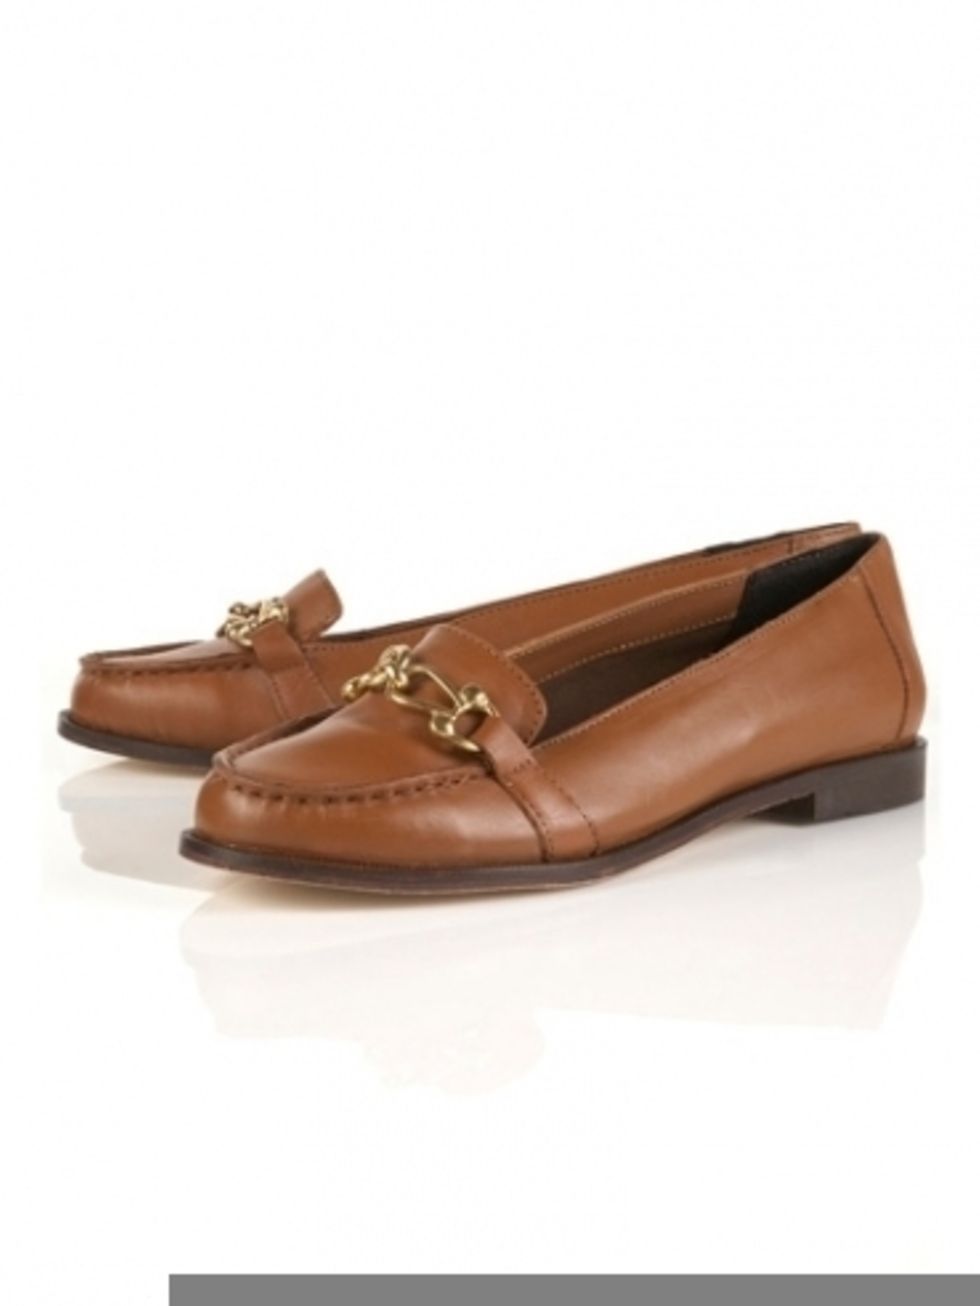 Footwear, Brown, Product, Tan, Leather, Liver, Beige, Dress shoe, Fawn, Fashion design, 